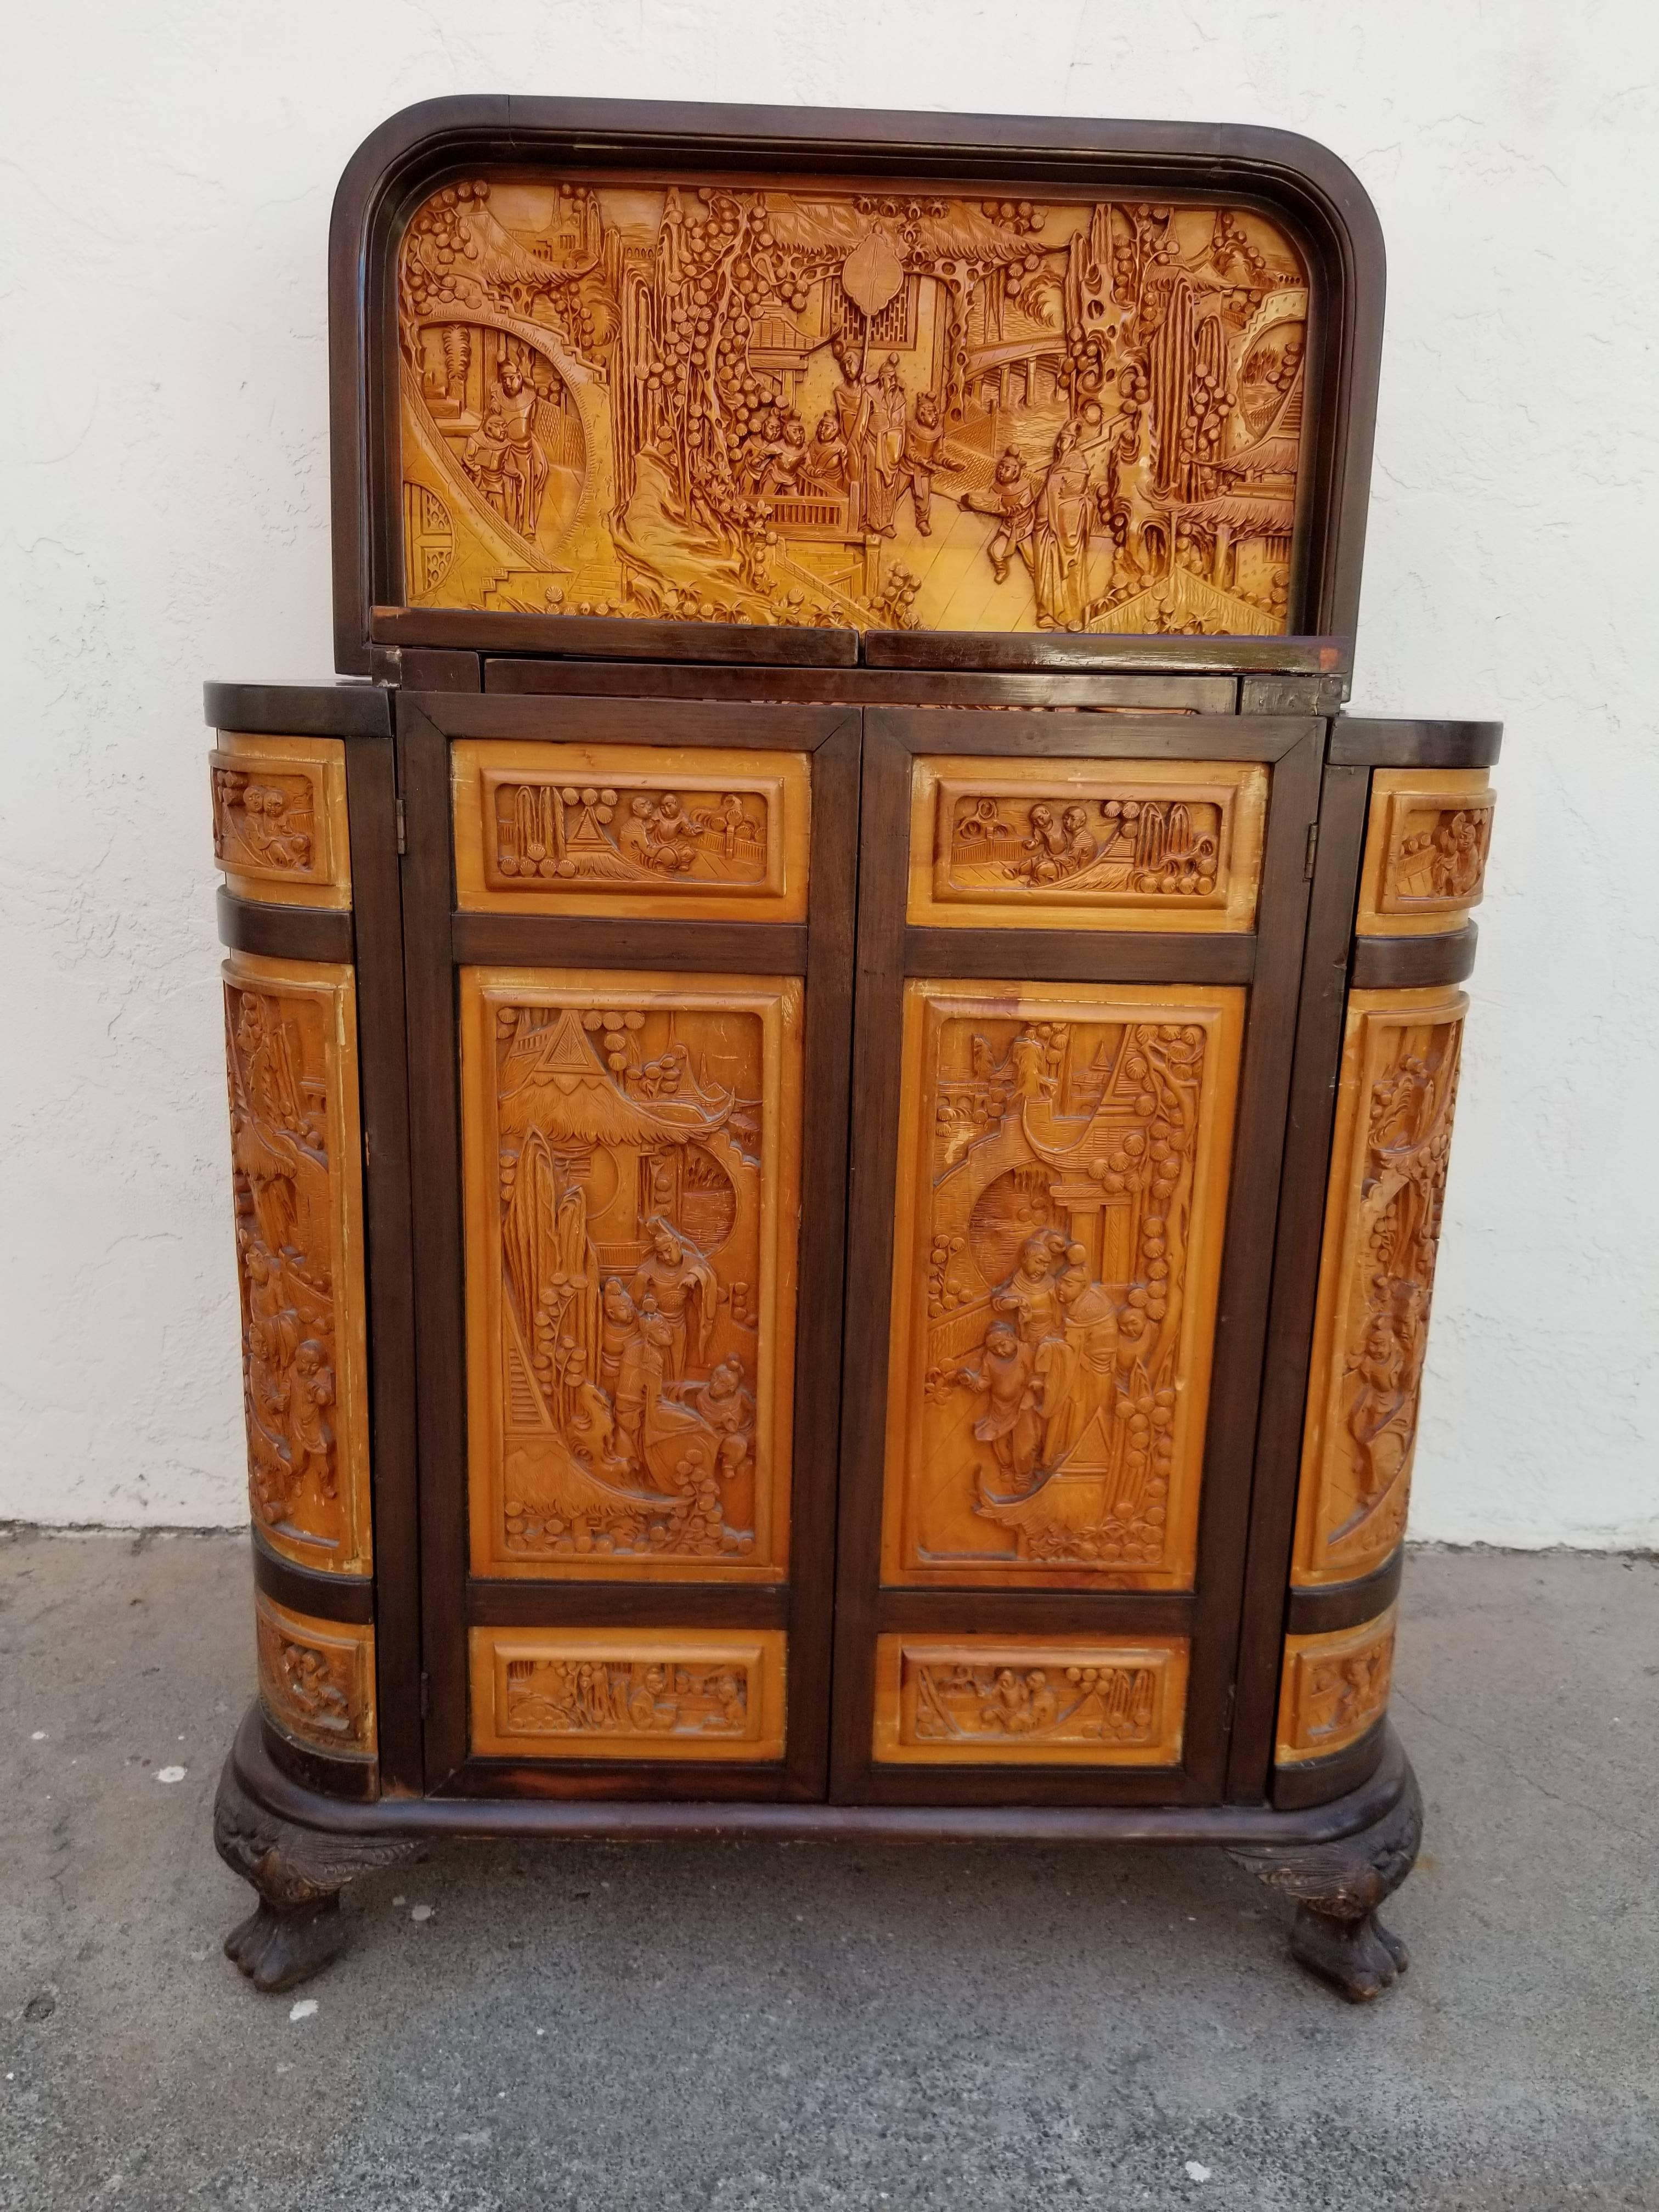 Highly detailed compartmentalized flip-top dry bar with a two-tone finish. Diminutive size with cabinet doors and drawers on three sides for maximum storage. Hand-carved Asian figures, flowers and architecture. Overall height when top is open